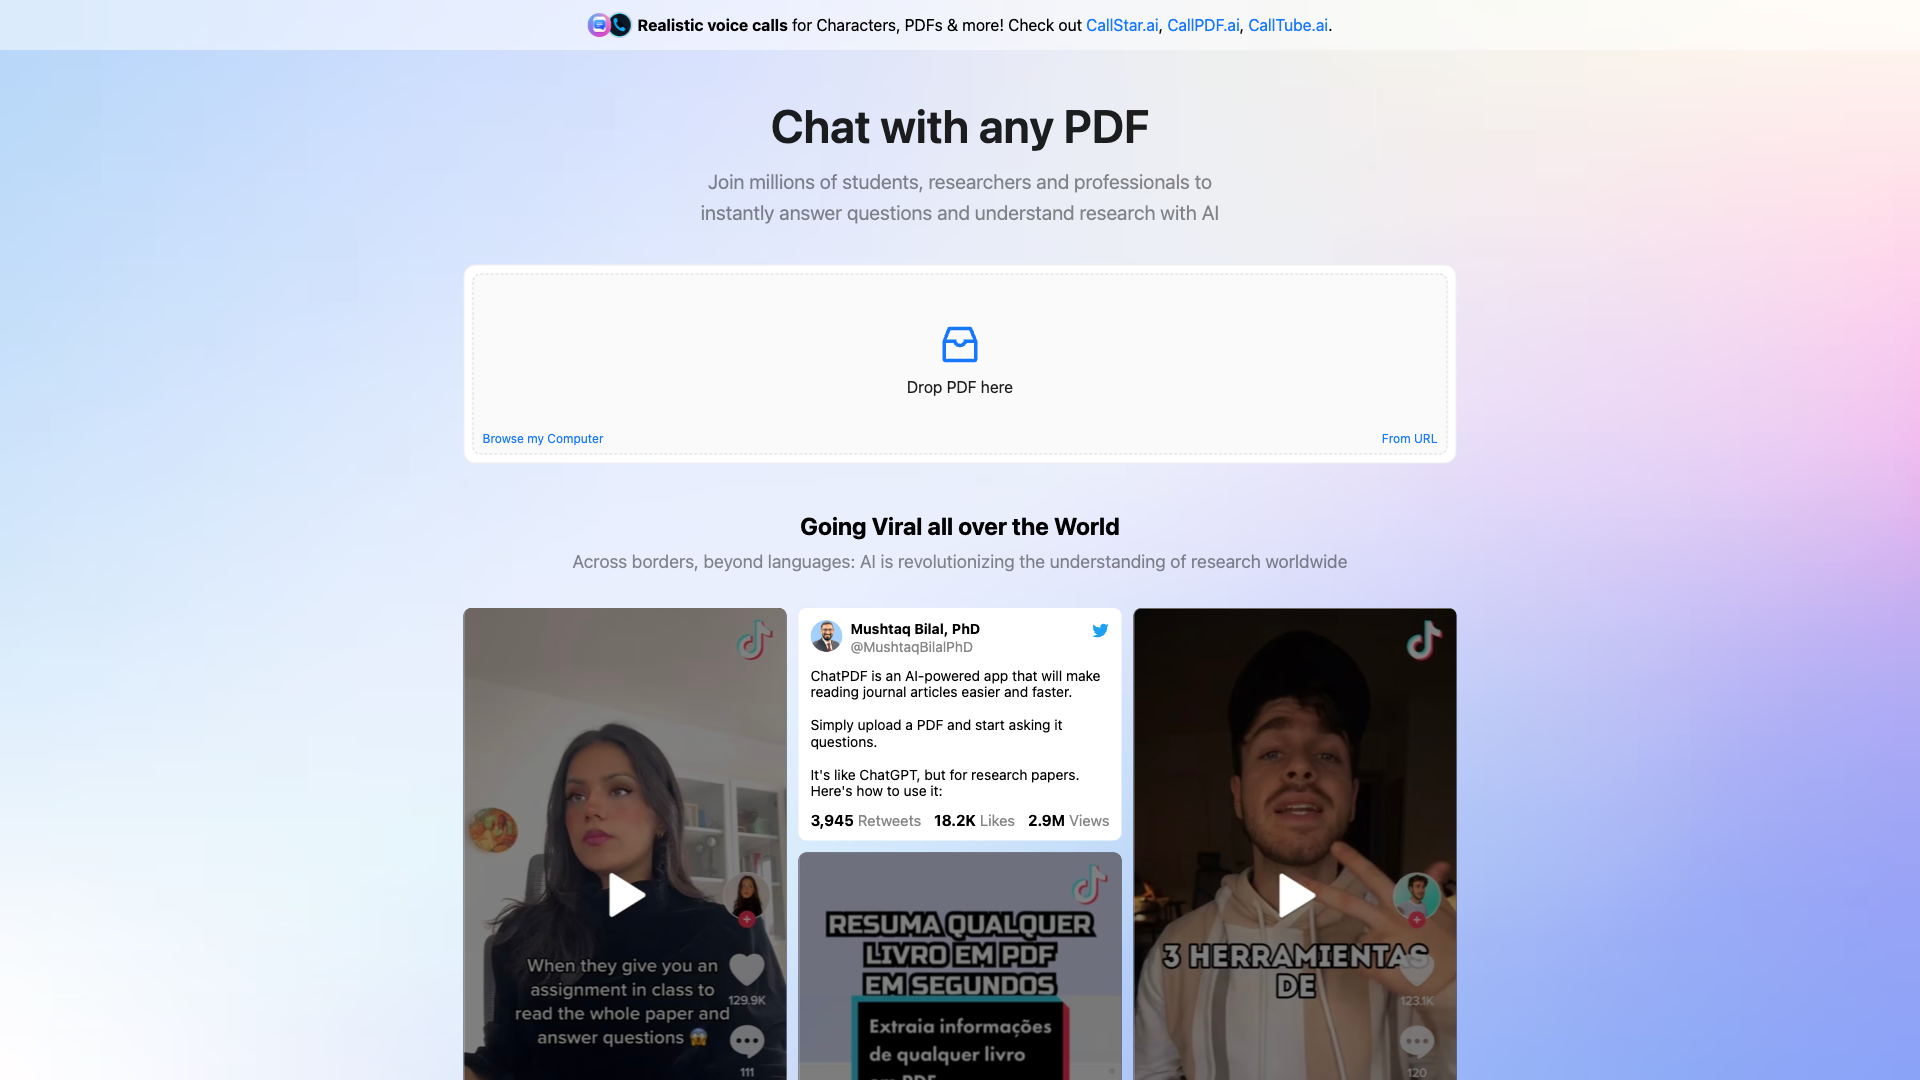 Display image for ChatPDF